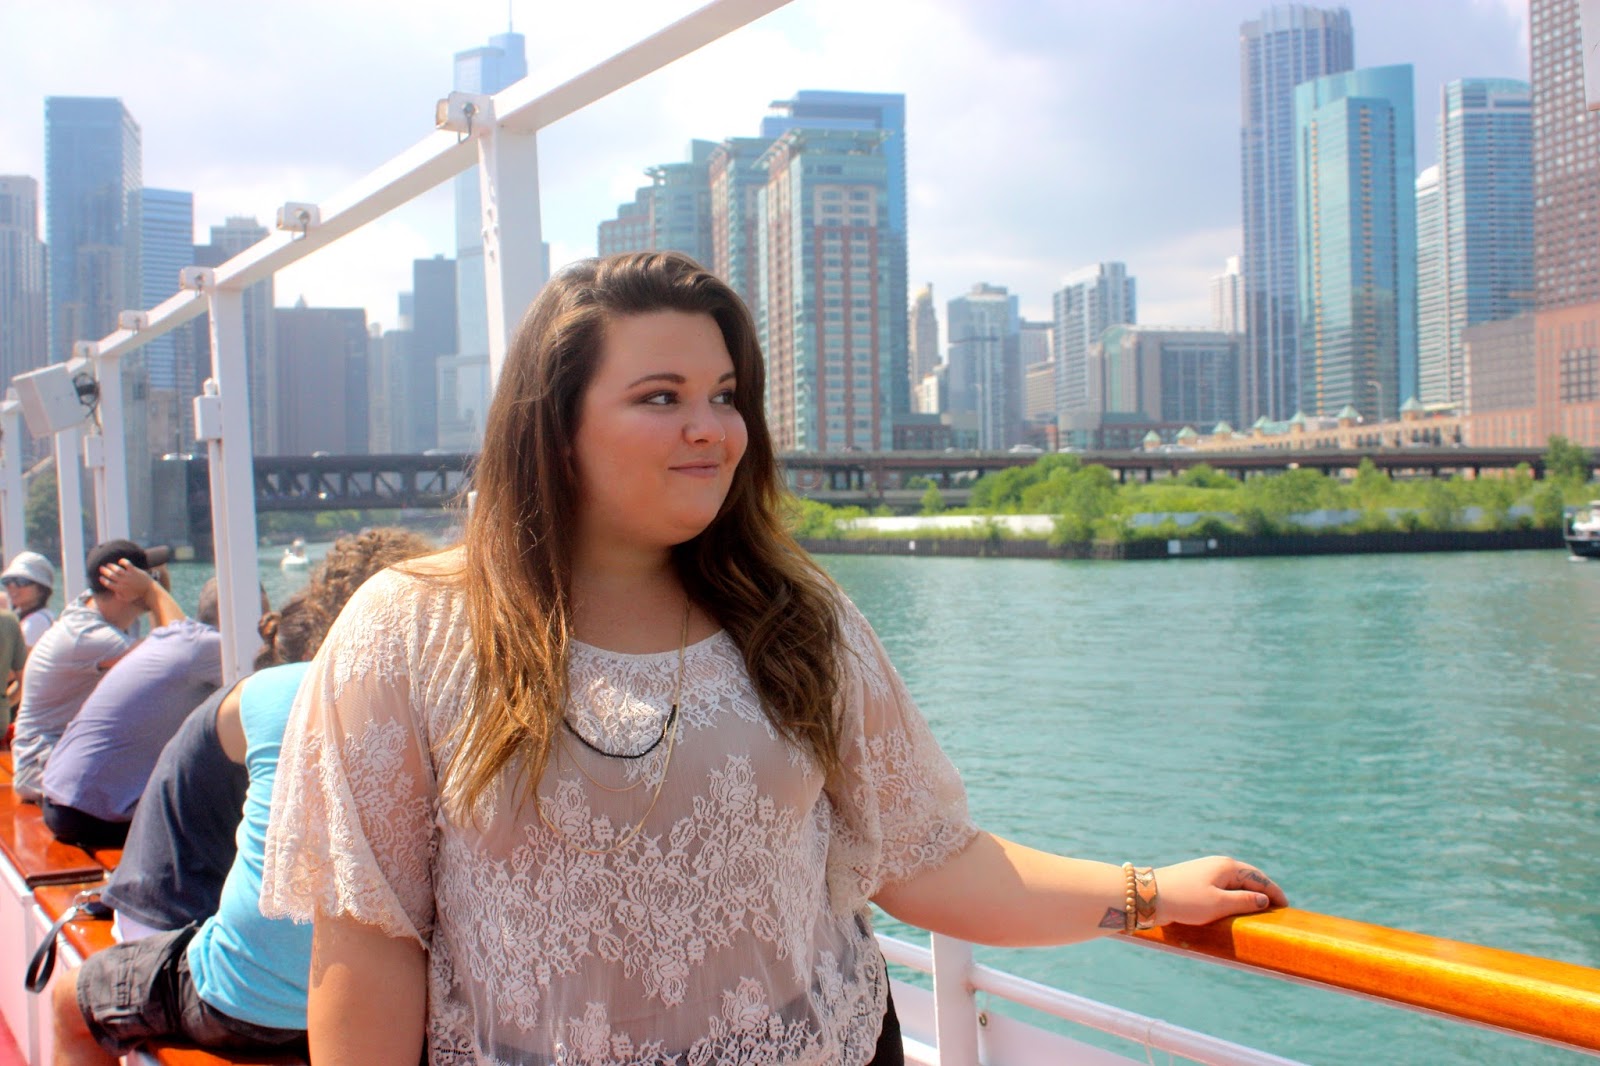 natalie in the city, chicago, shoreline sightseeing, plus size fashion, fashion blogger, windy city blogger, curvy, urban outfitters, natalie craig, chicago river, chicago architecture, trump tower